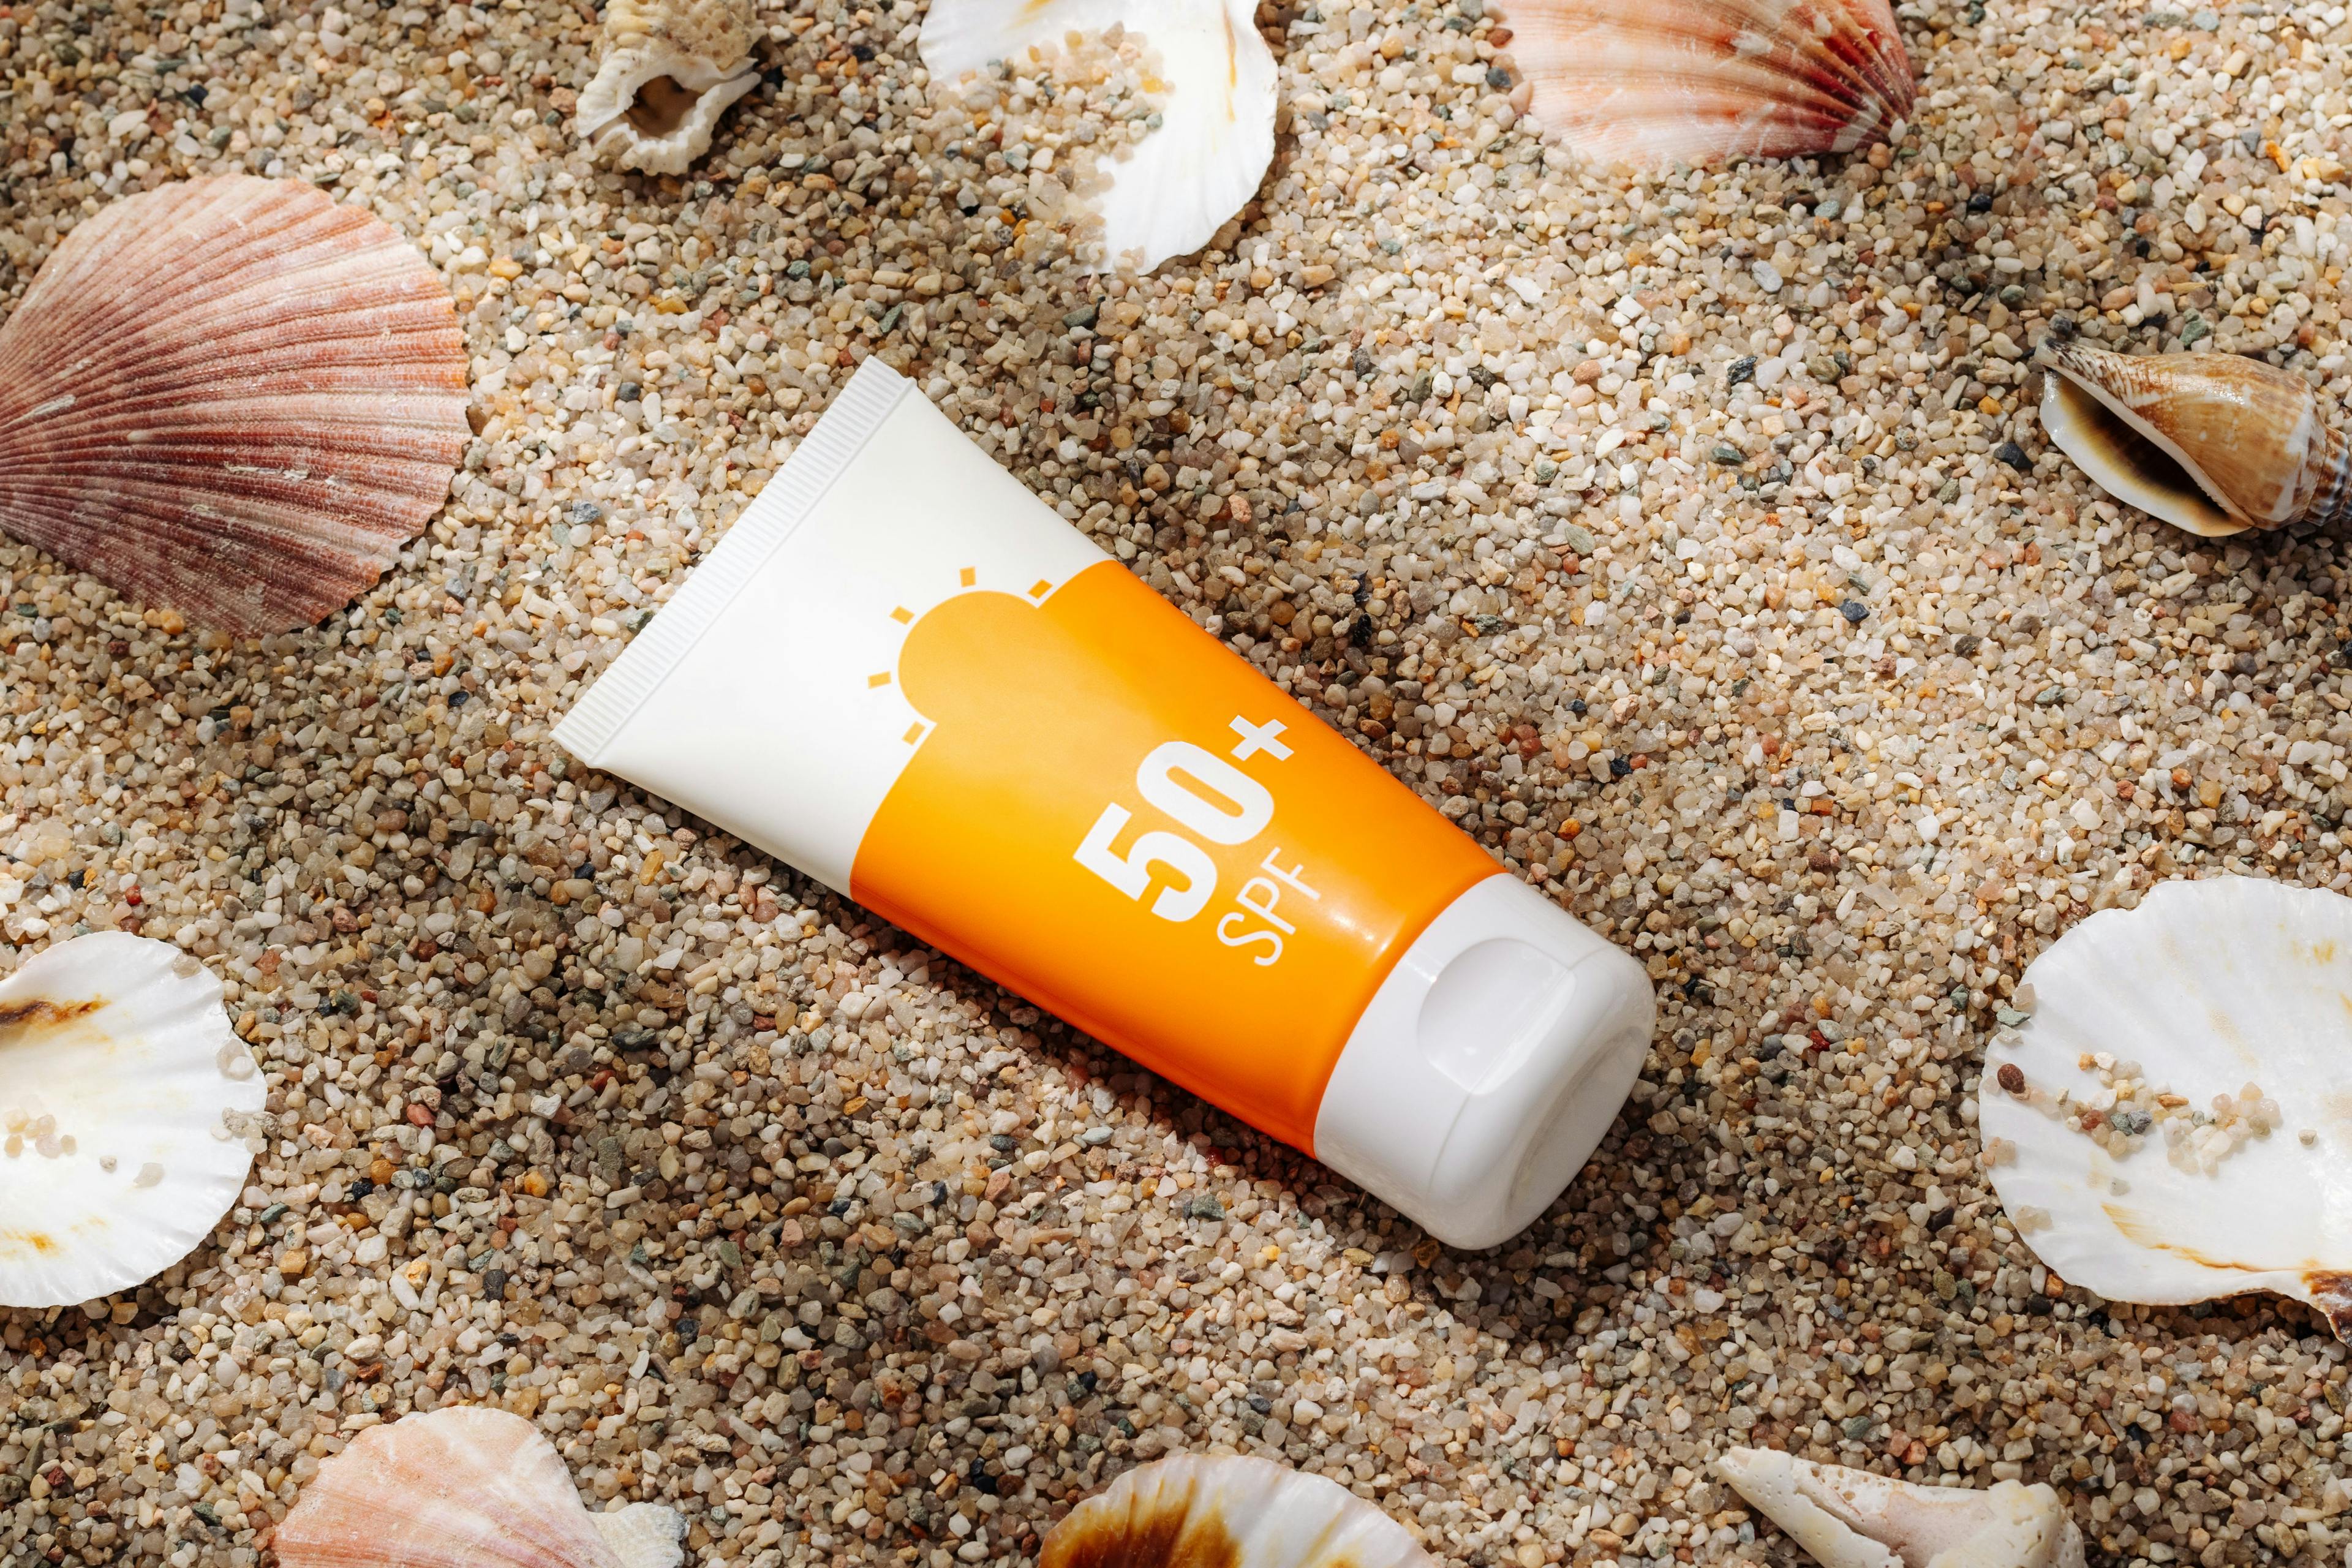 Sunscreen Safety: What Every Pharmacist Needs to Know